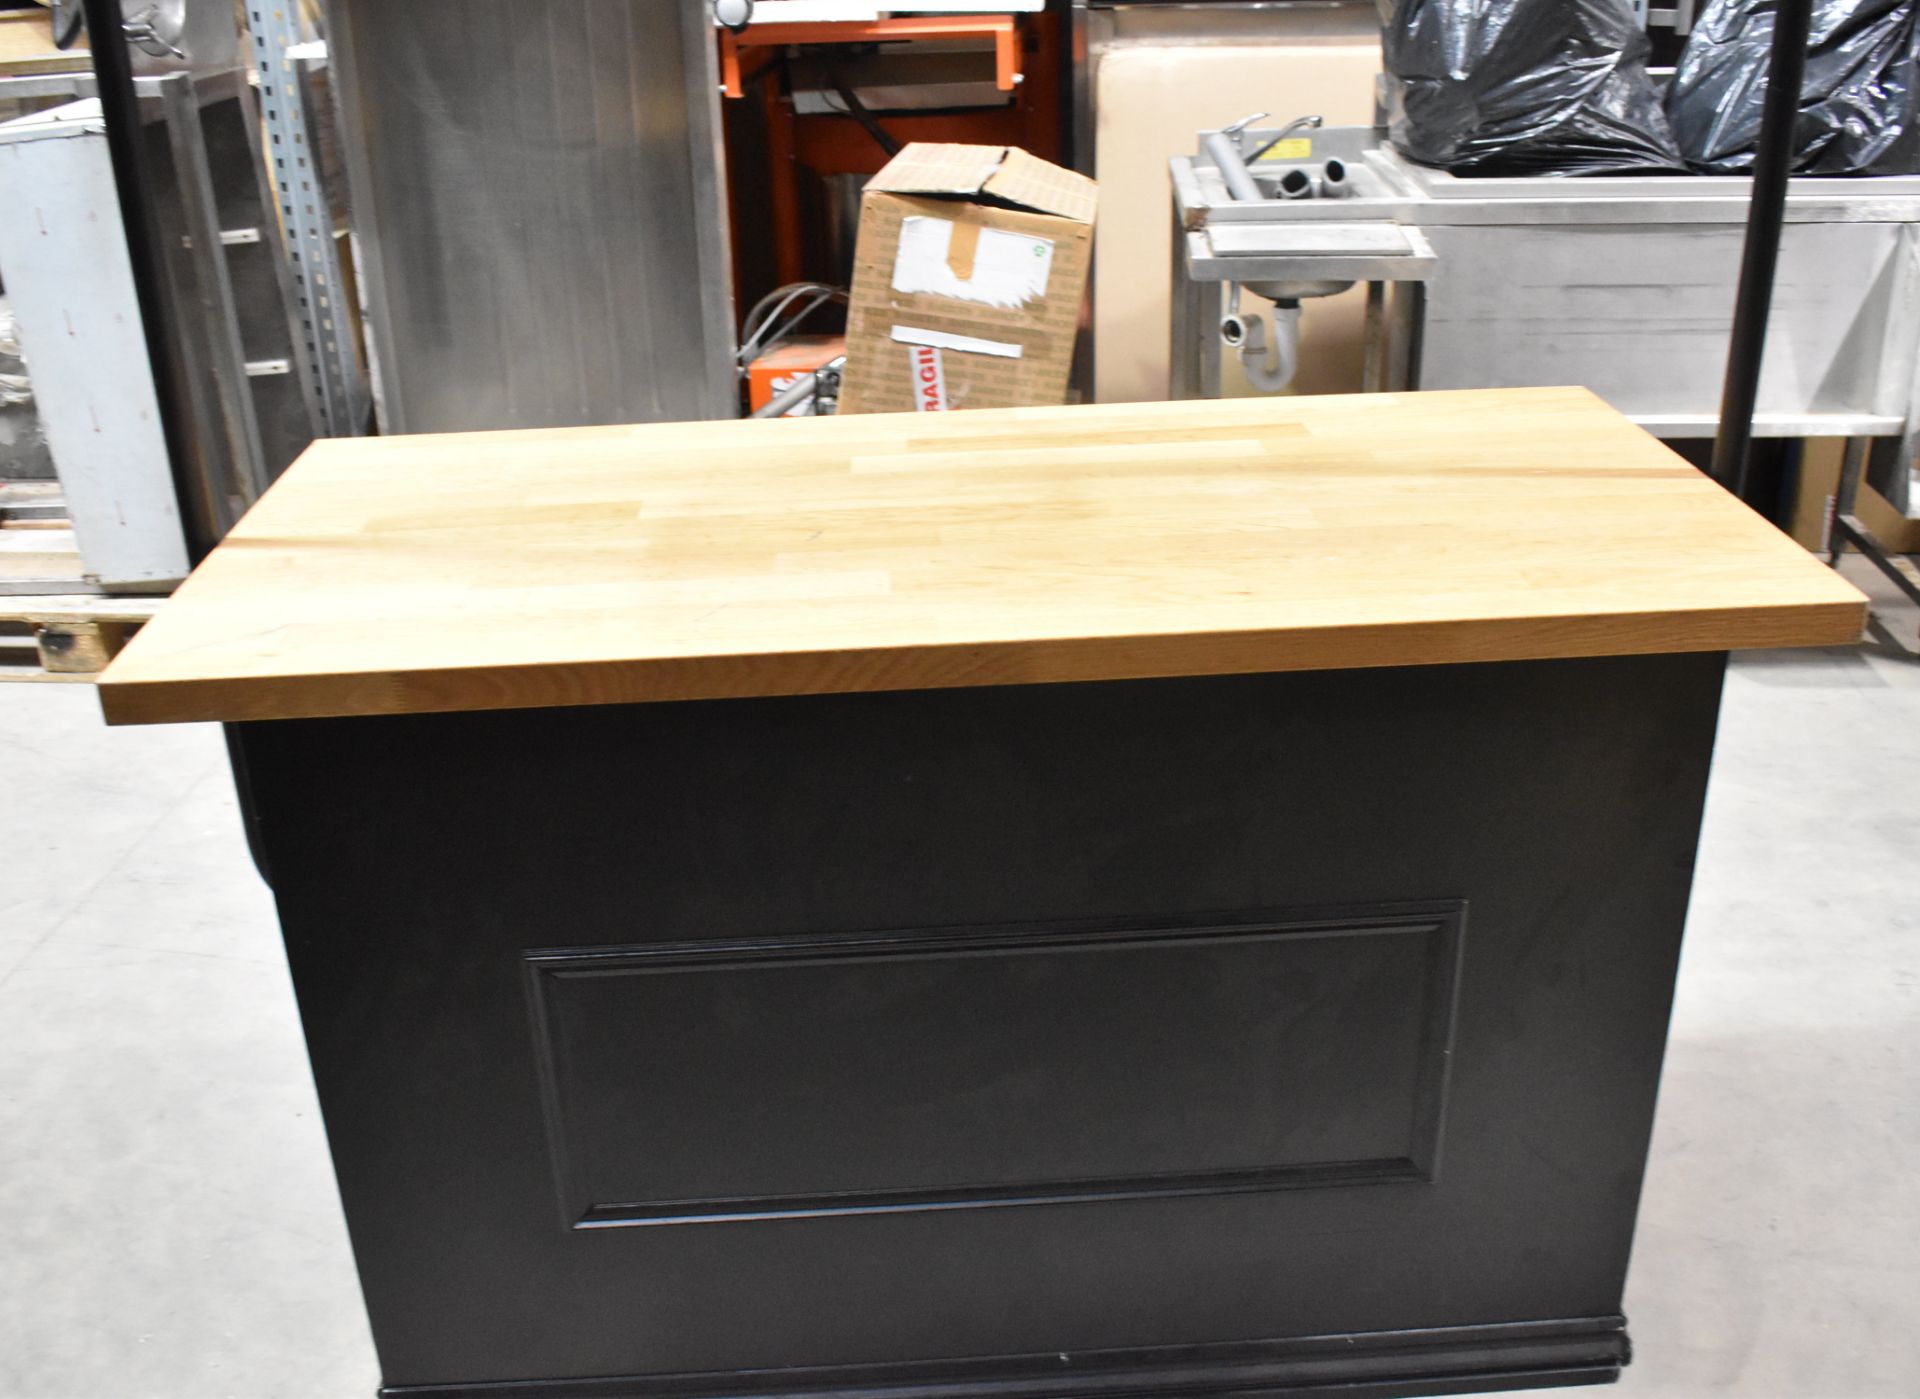 1 x Wooden Counter In Black With Wood Coloured Top and Metal Overrack Display Shelf With Hooks - 84/ - Image 2 of 10